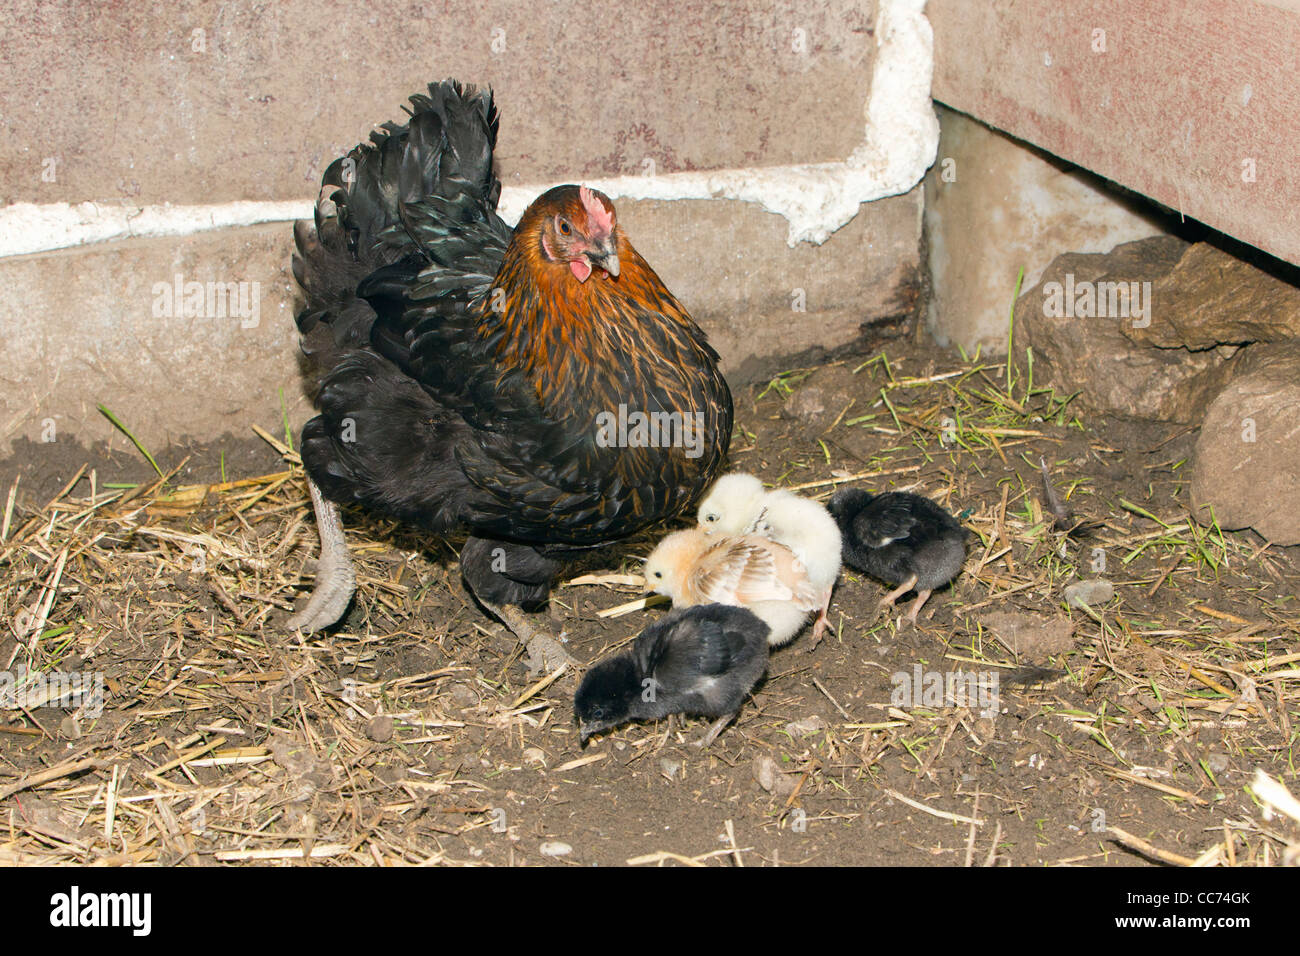 Hen with Chicks, Feeding in Chicken Shed, Lower Saxony, Germany Stock Photo